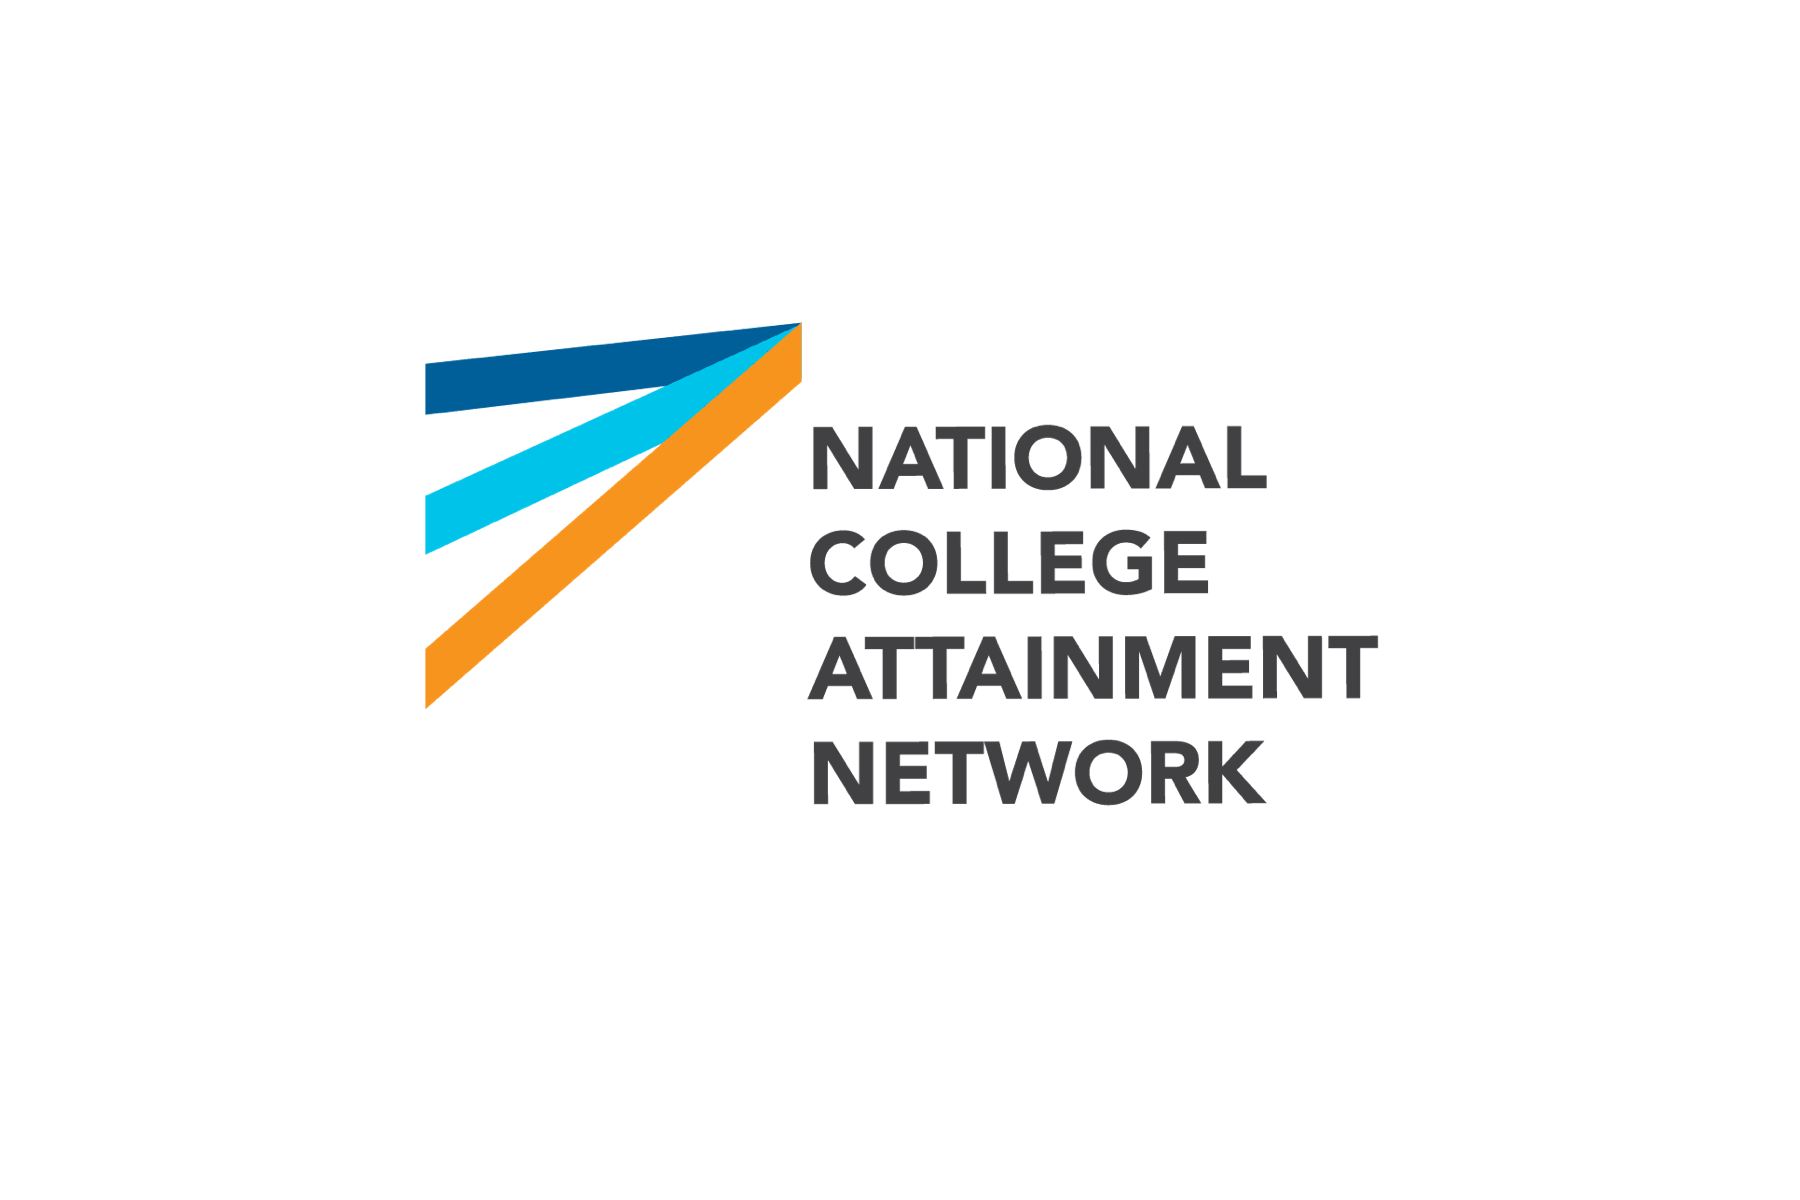 National College Attainment Network